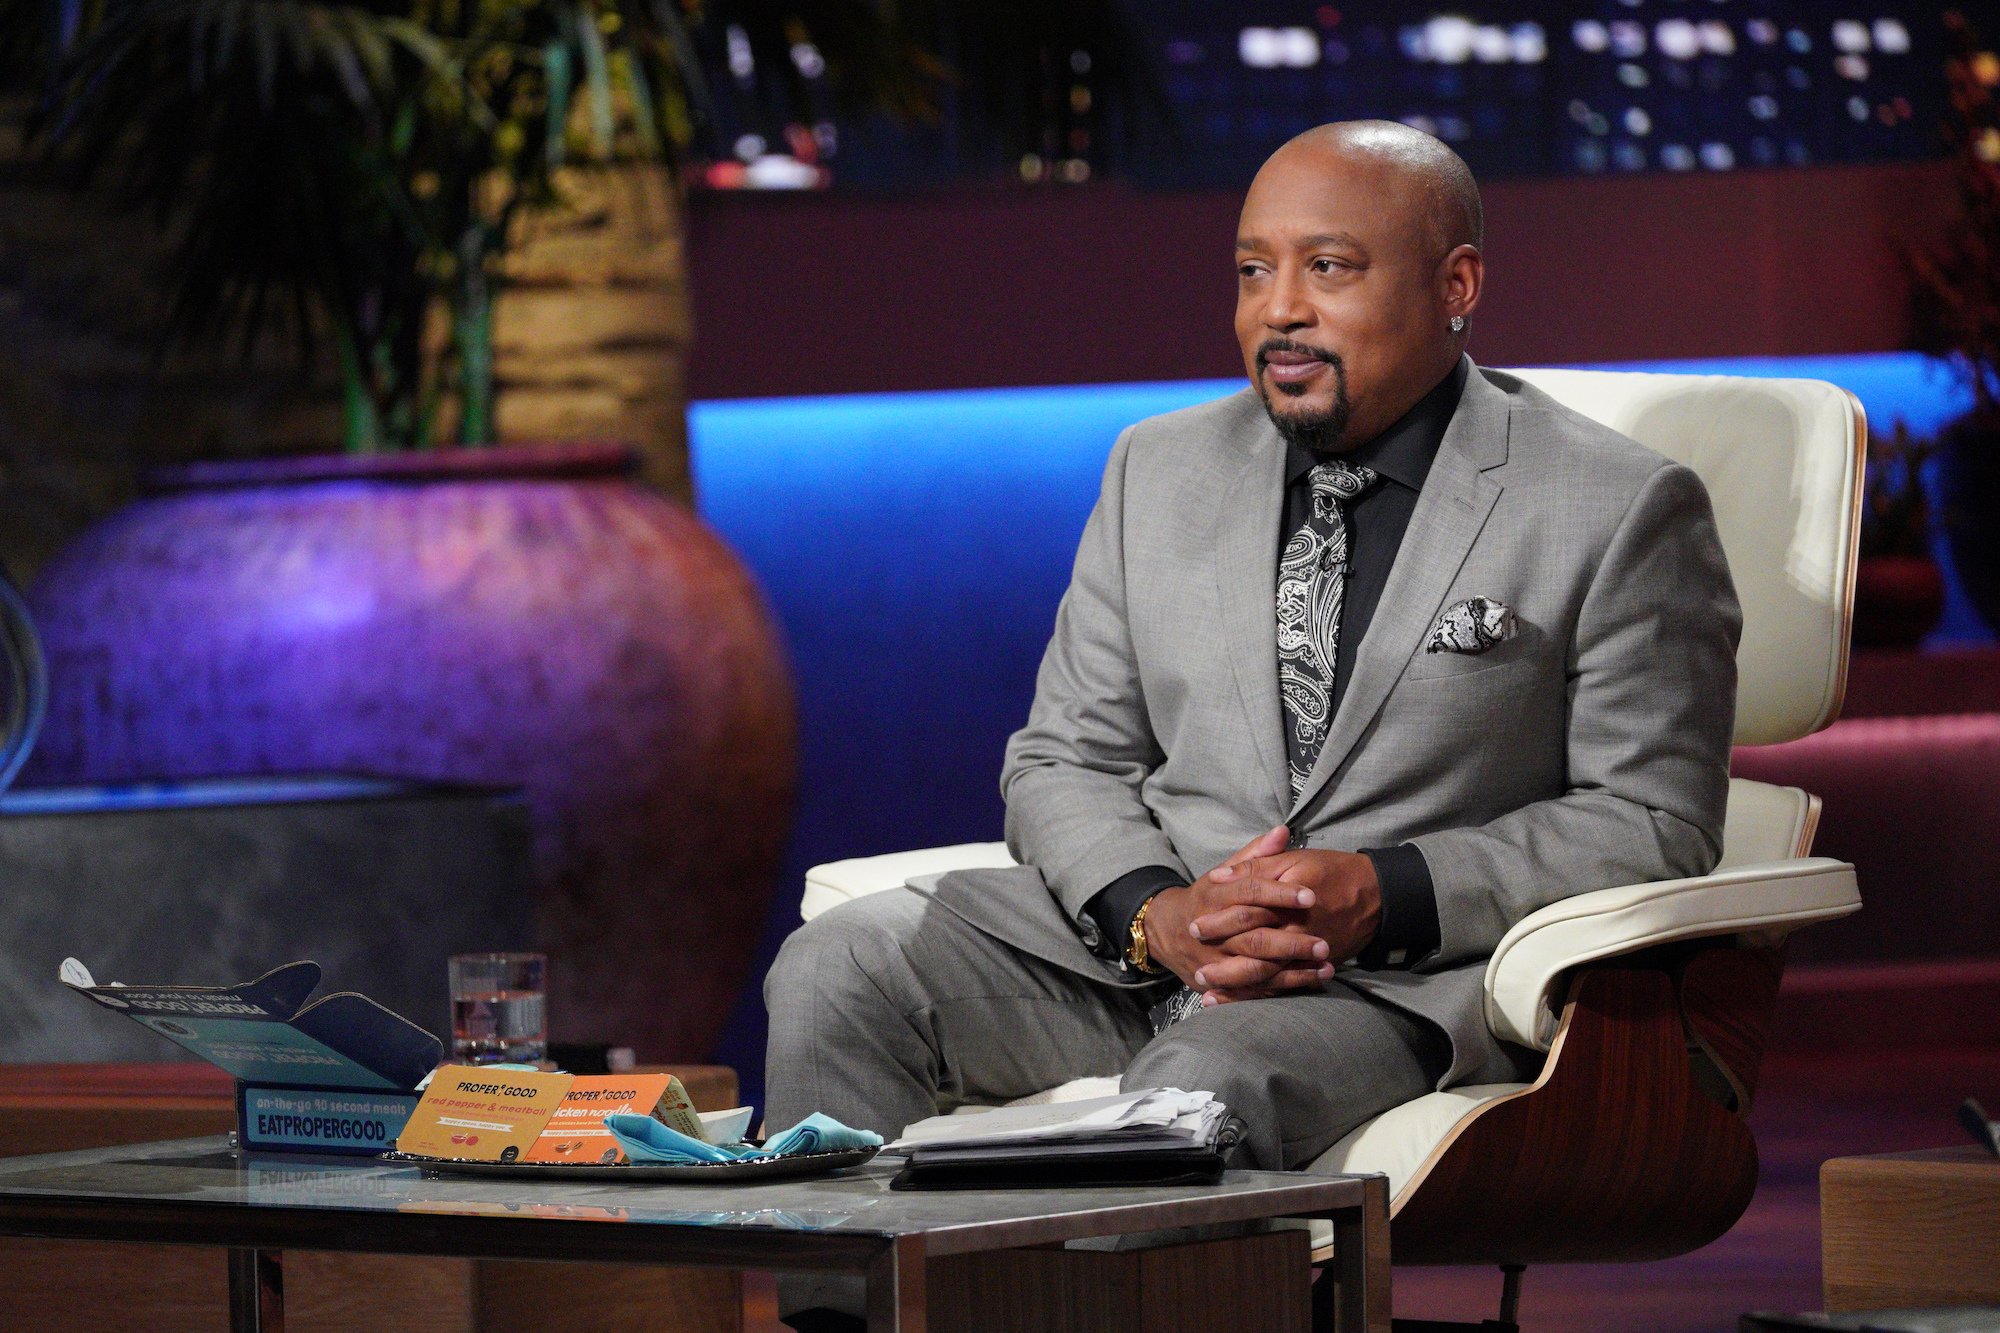 American business reality show Shark Tank 13 all set to premiere